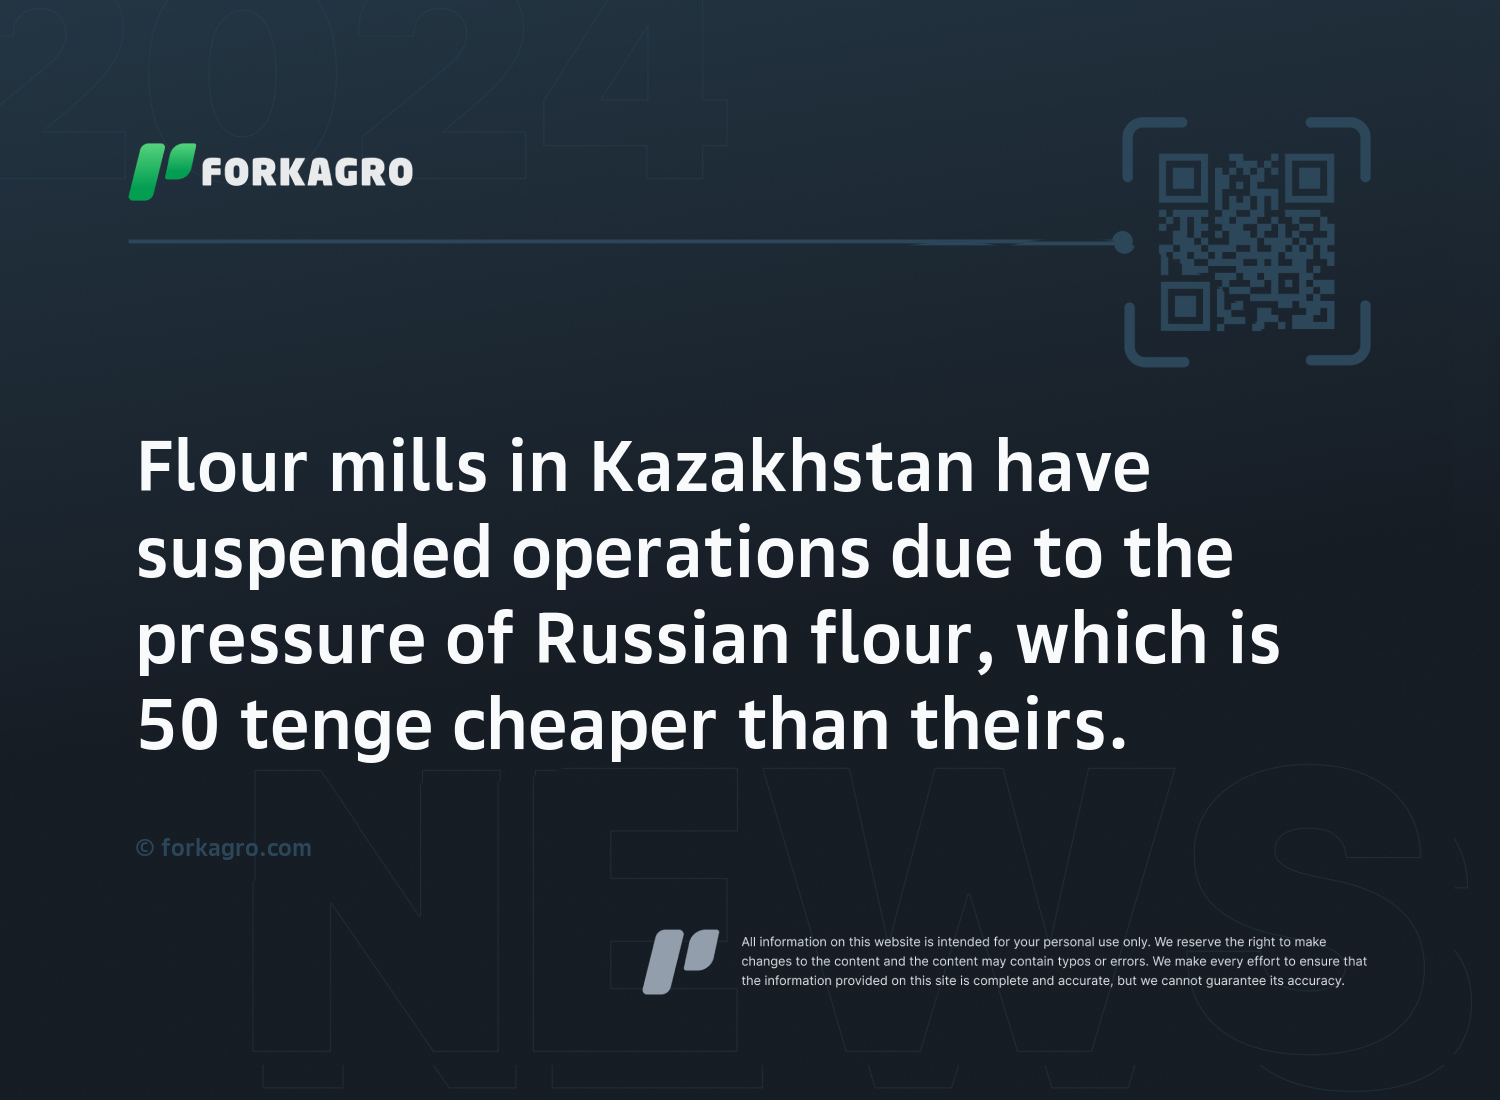 Flour mills in Kazakhstan have suspended operations due to the pressure of Russian flour, which is 50 tenge cheaper than theirs.